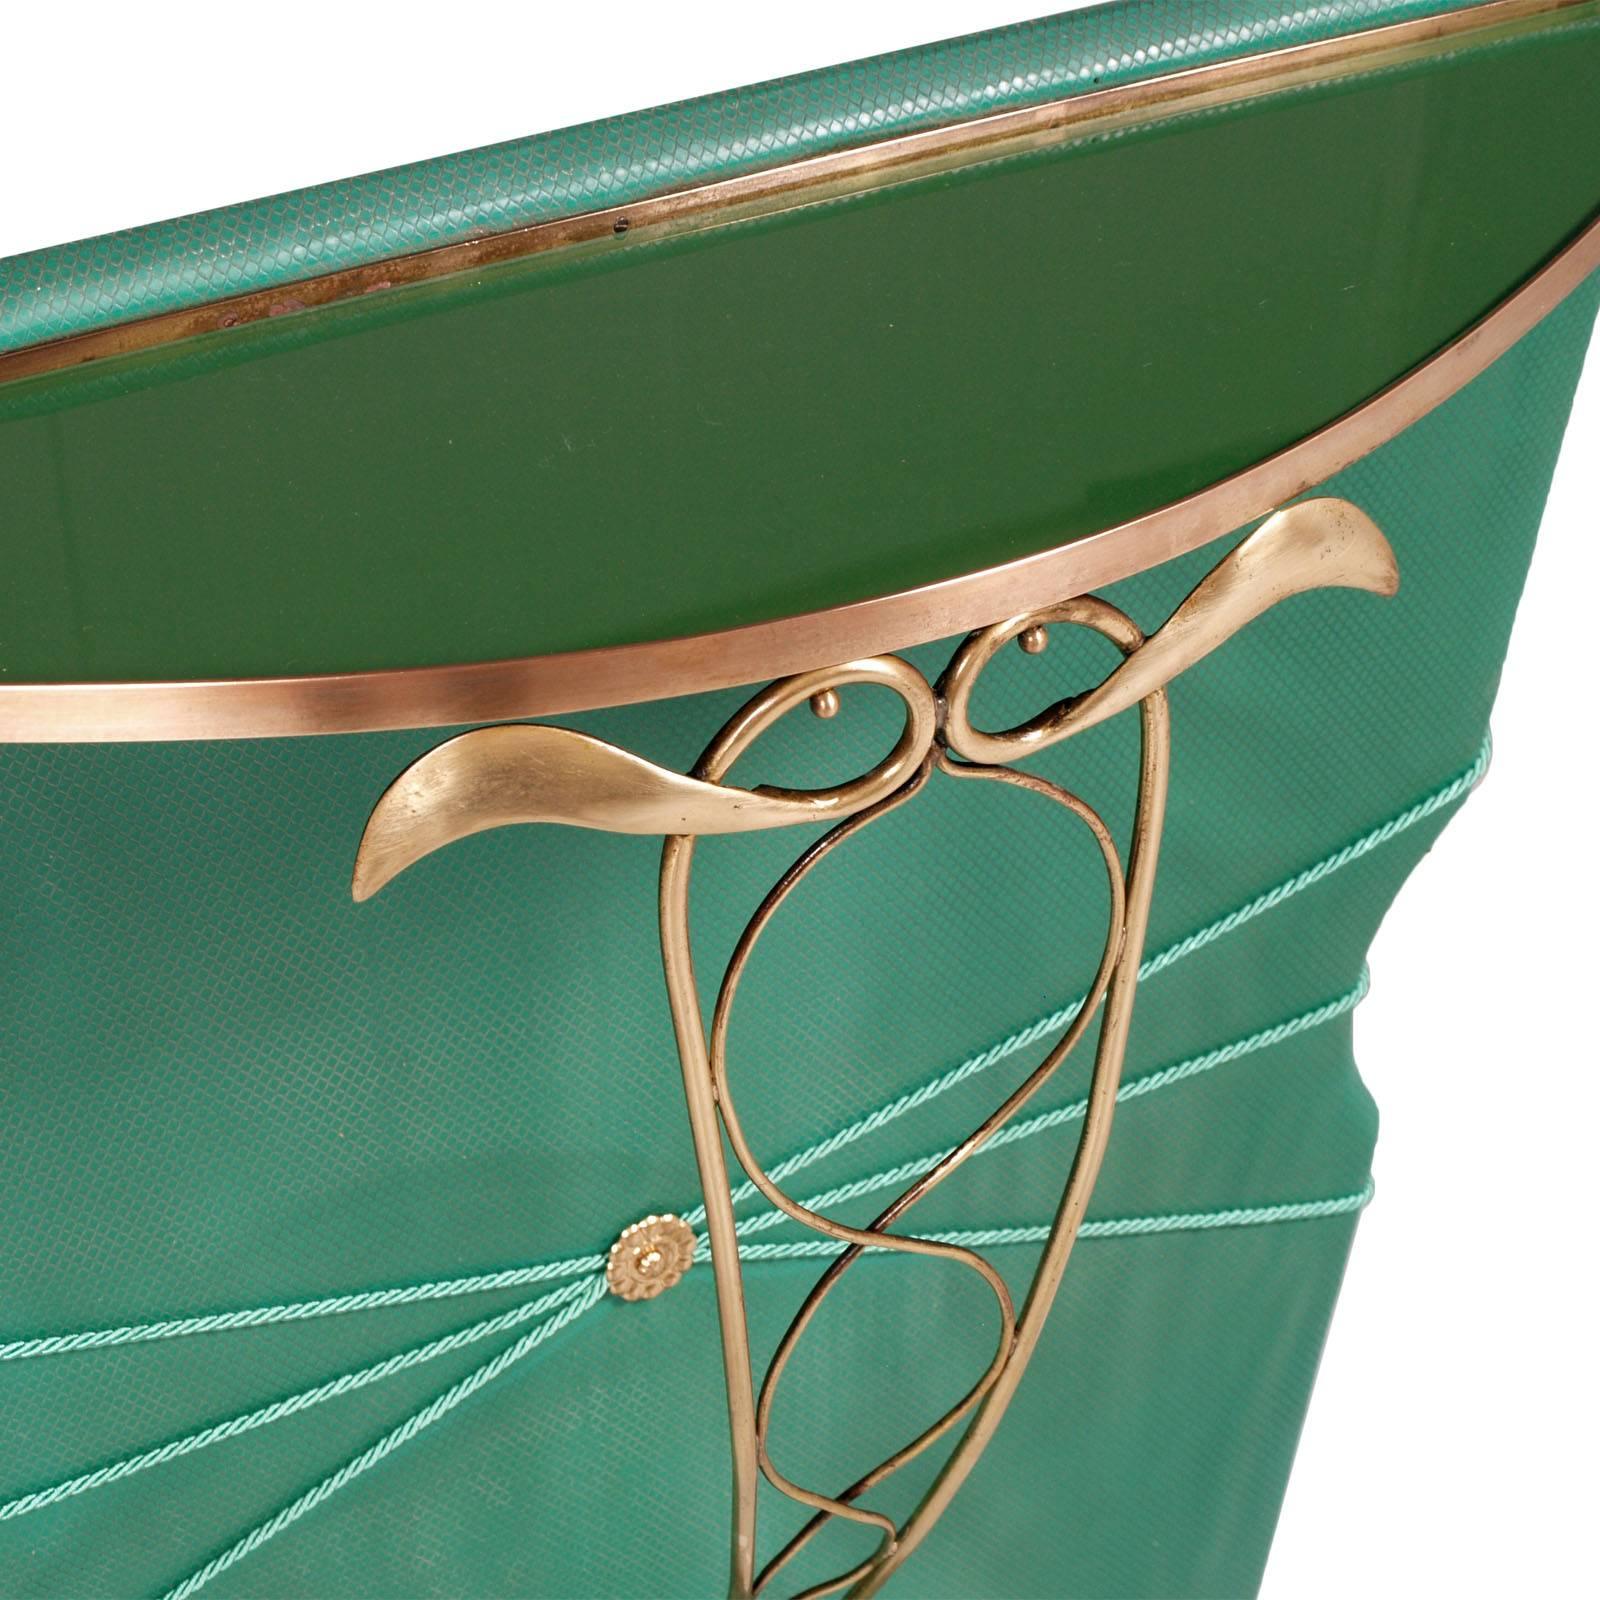 Elegant and rare 1940s Mid-Century Modern console Pier Luigi Colli attributed in gilt brass, plasticized lining and with green lacquered top glass
Restored, in excellent condition

Measure in cm: H 90 W 80 D 25.

About Pier Luigi Colli : History
The